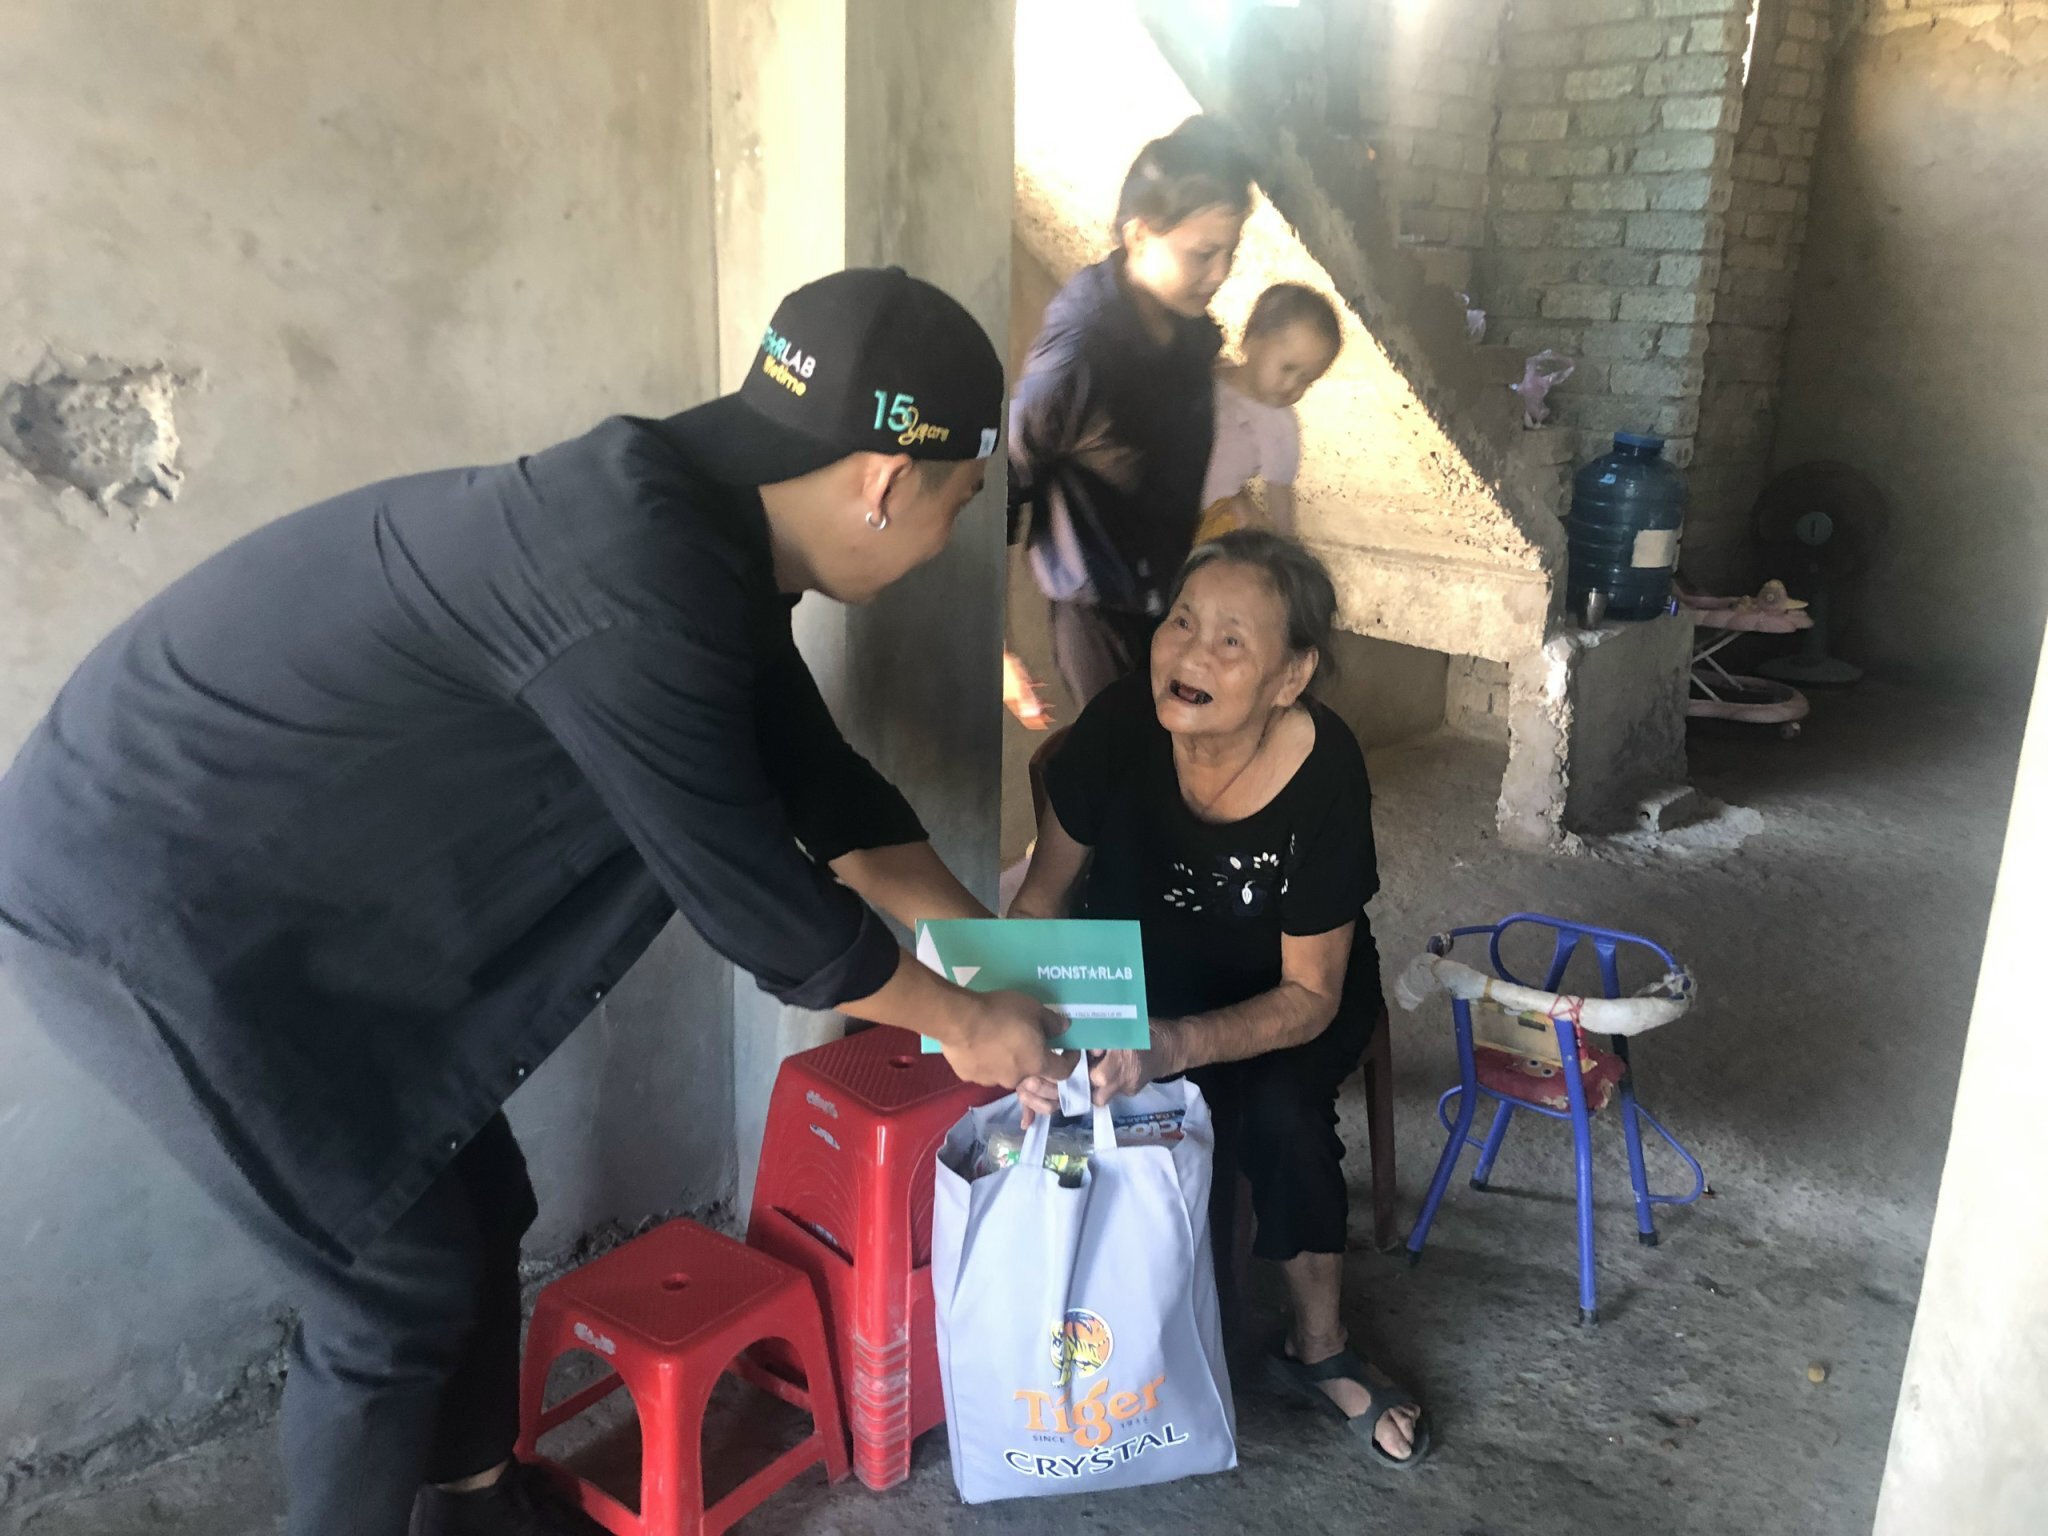 Monstarlab employee hands over the aid to the person rescued from typhoon damage